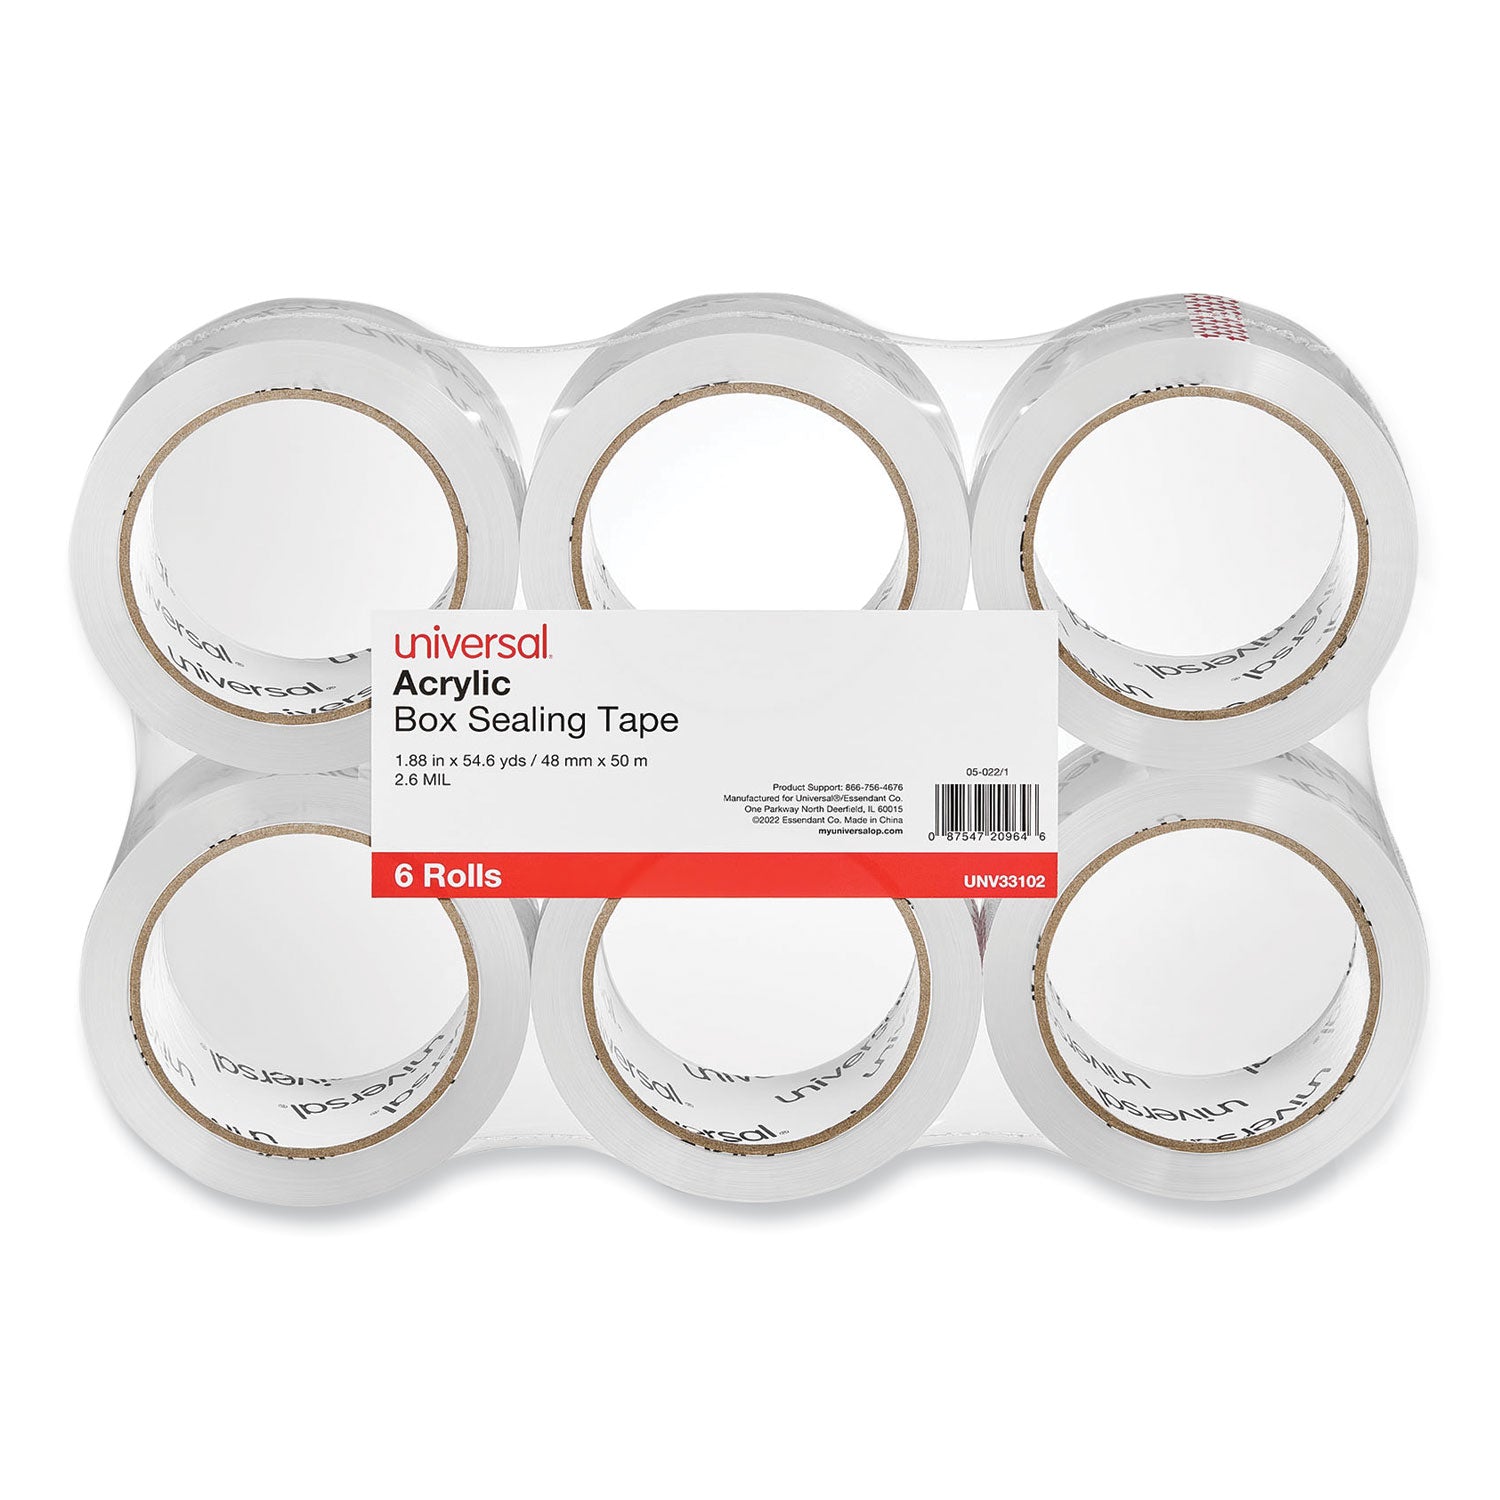 moving-and-storage-packing-tape-3-core-188-x-546-yd-clear-6-pack_unv33102 - 1